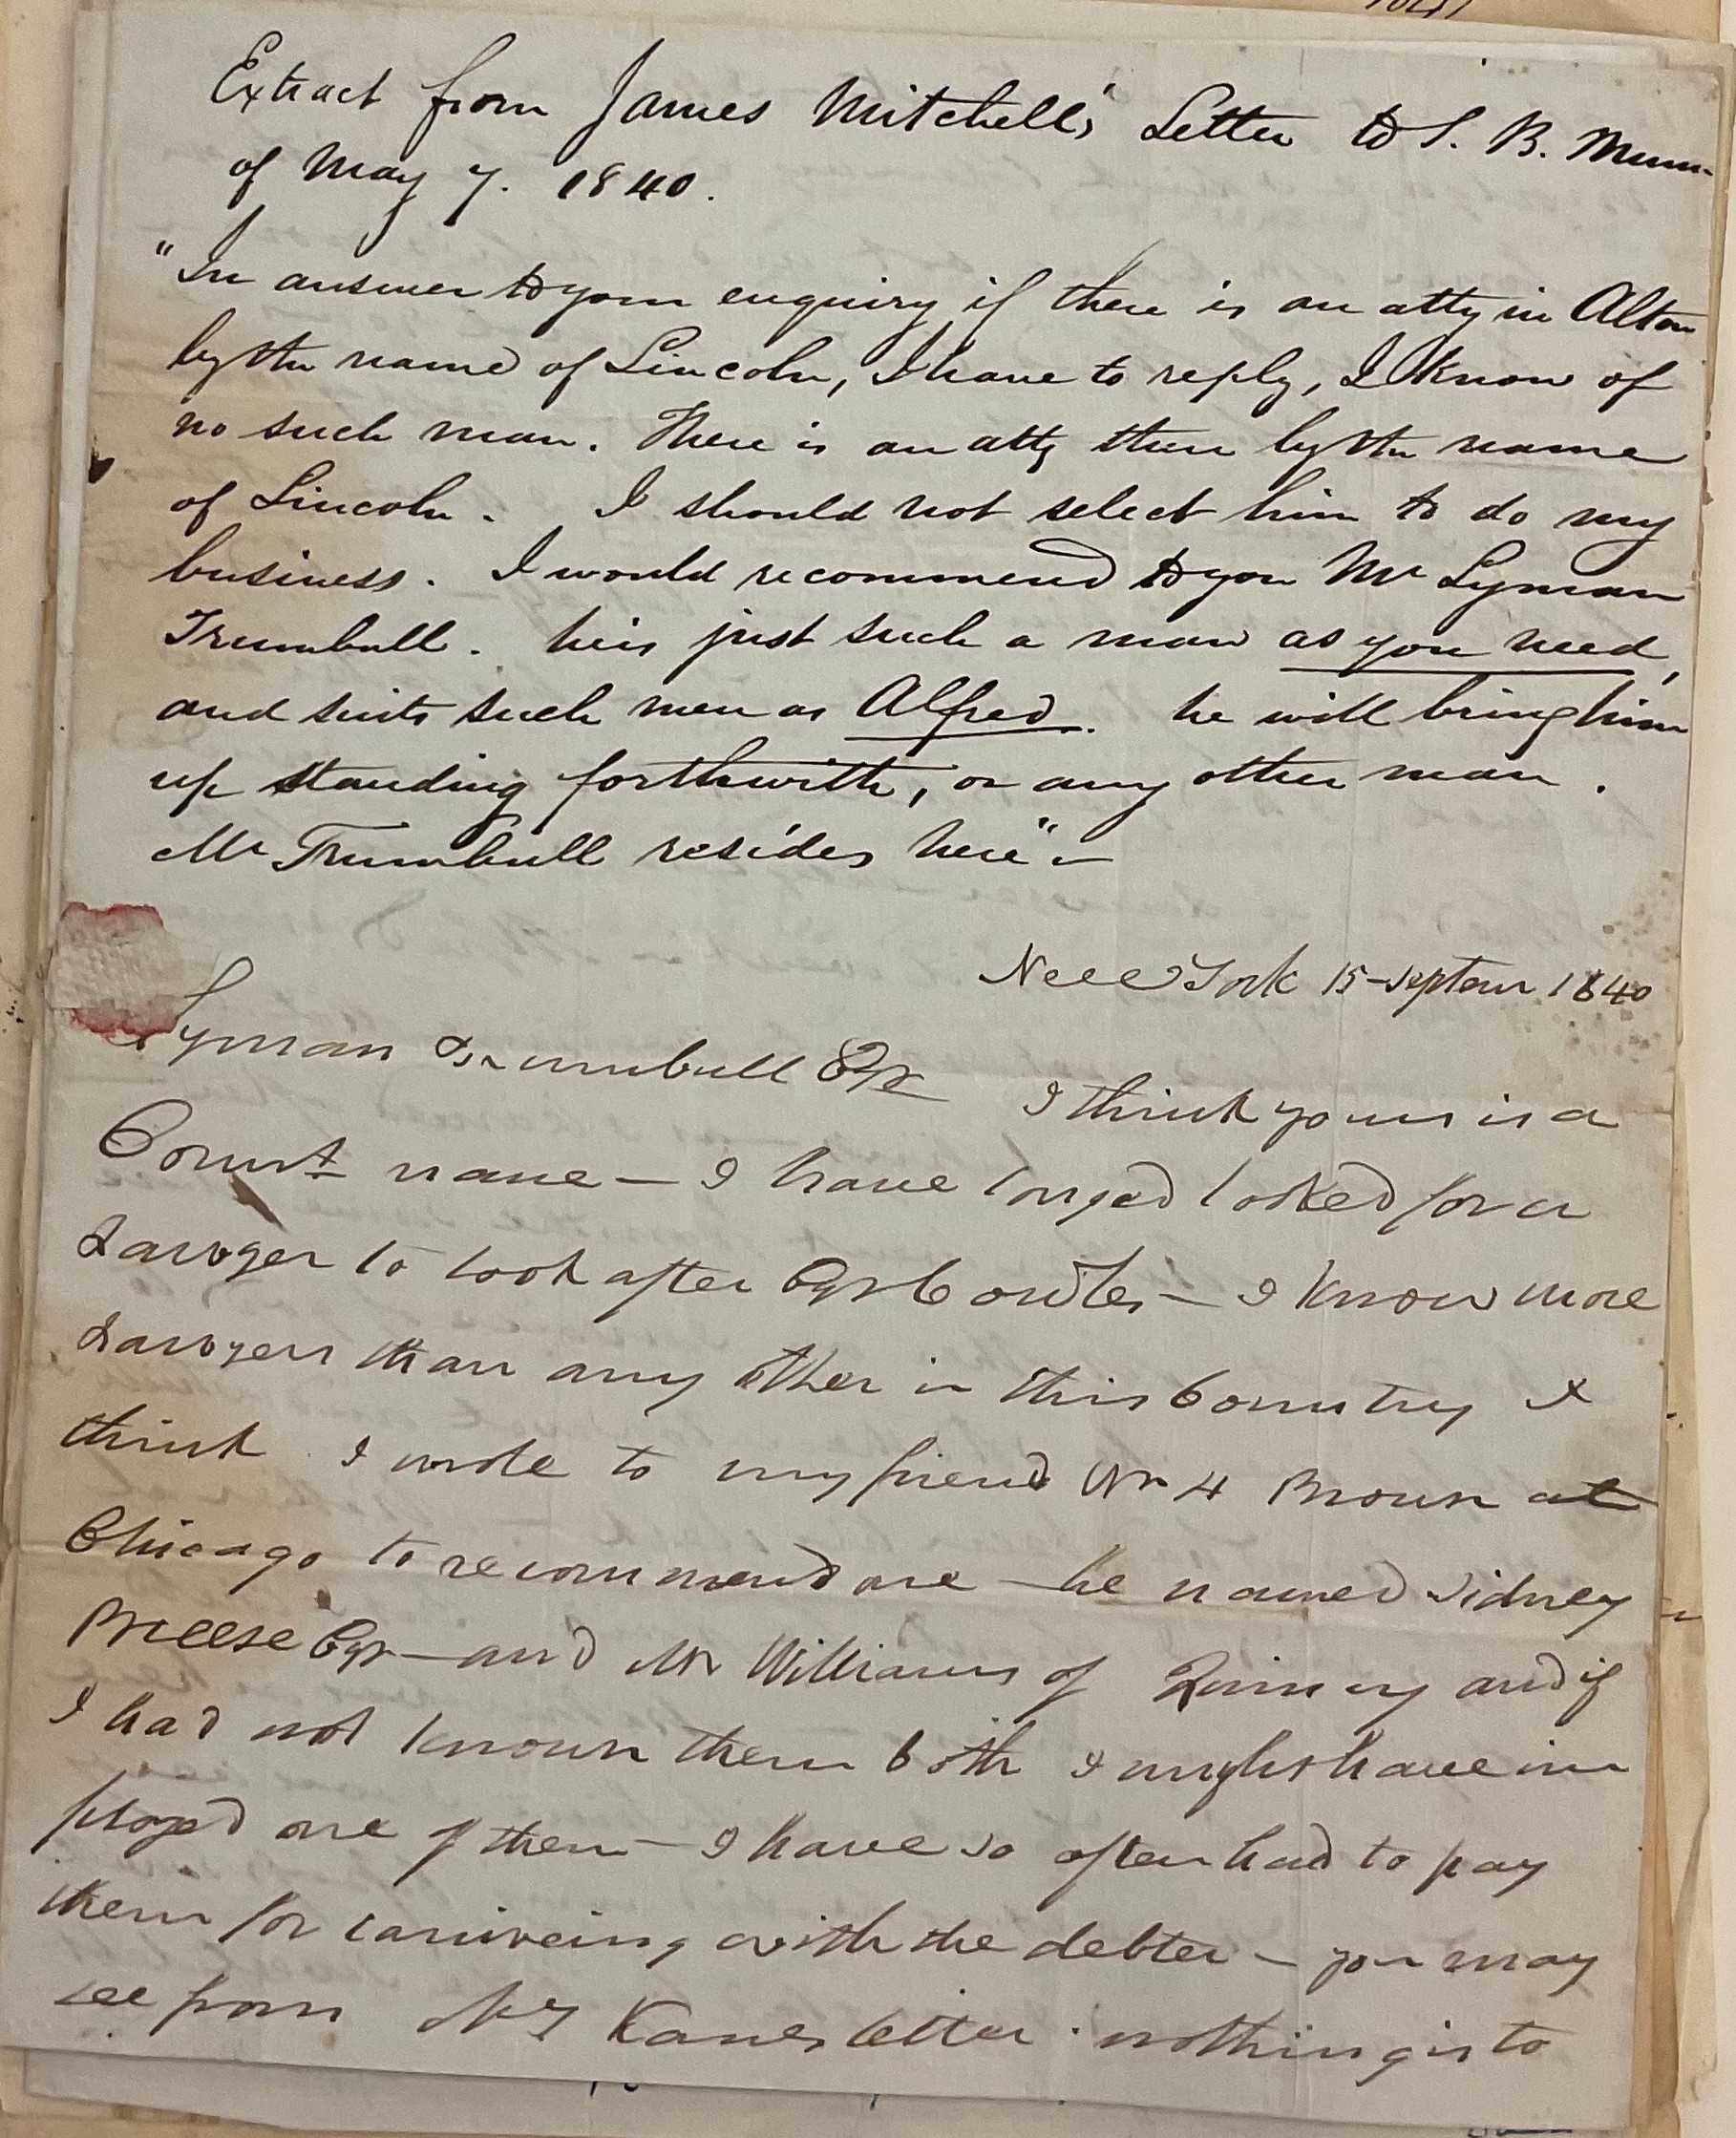 Letter from Rev. James Mitchell trying to find a lawyer in Illinois to help him buy property. | Credit Samuel Davis, Ph.D.